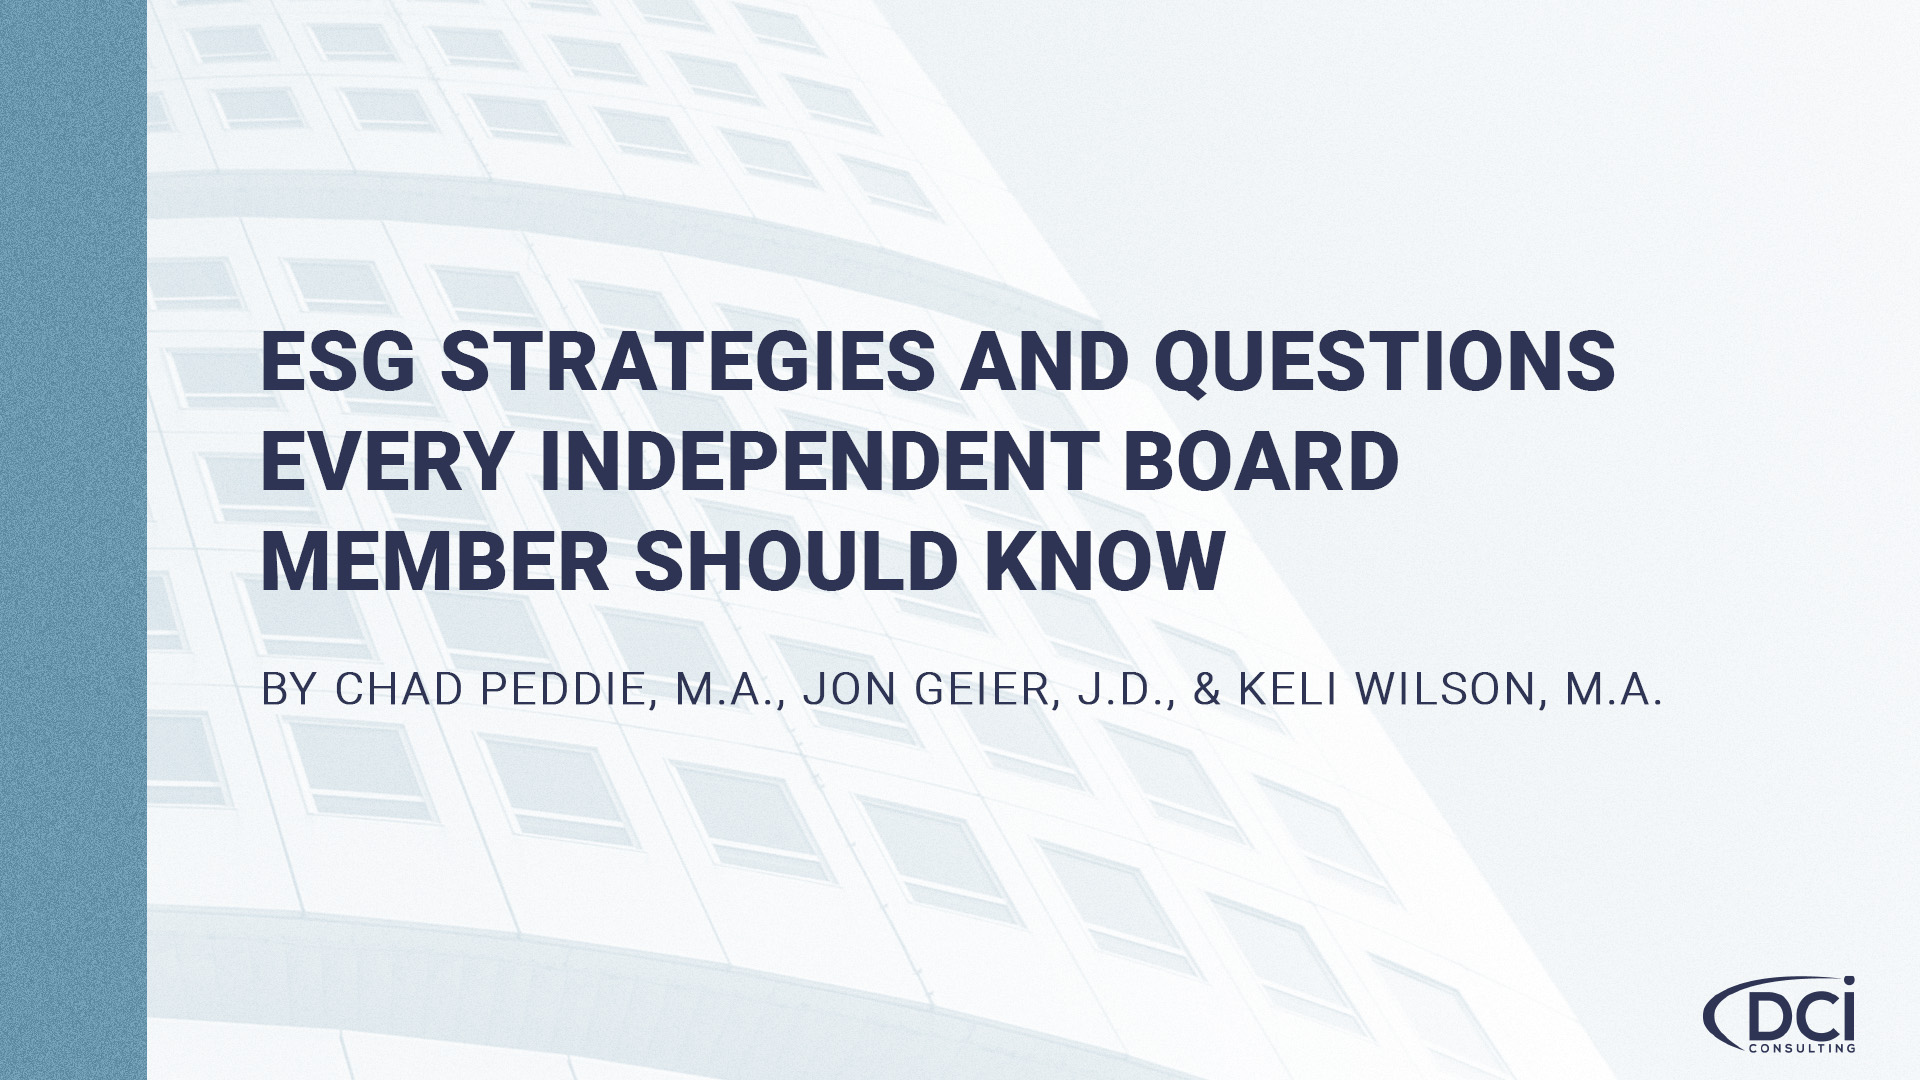 ESG Strategies and Questions Every Independent Board Member Should Know